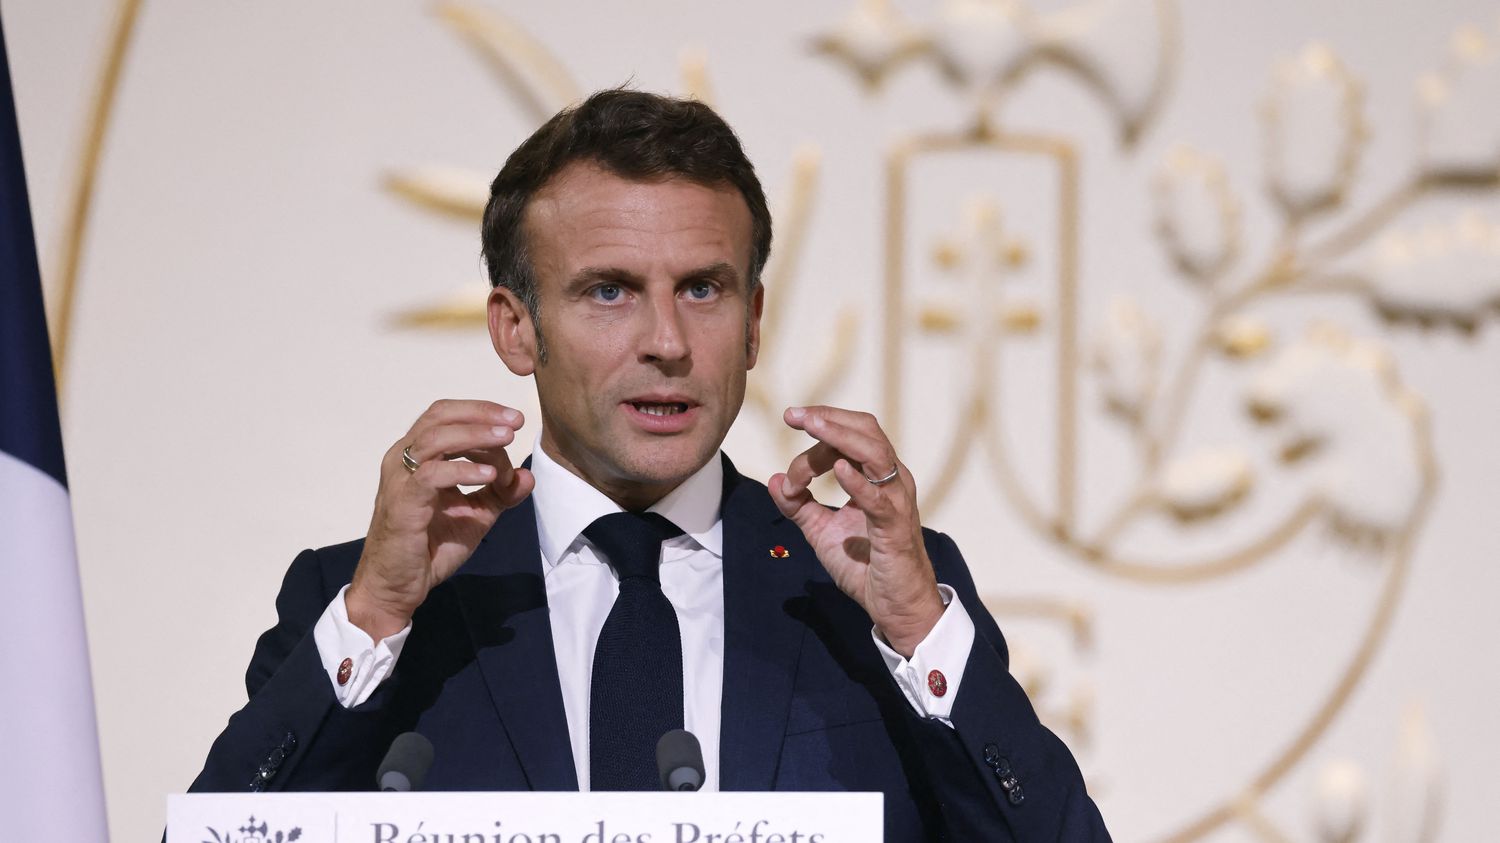 After unemployment insurance, pensions and the end of life, Emmanuel Macron puts immigration on the program
